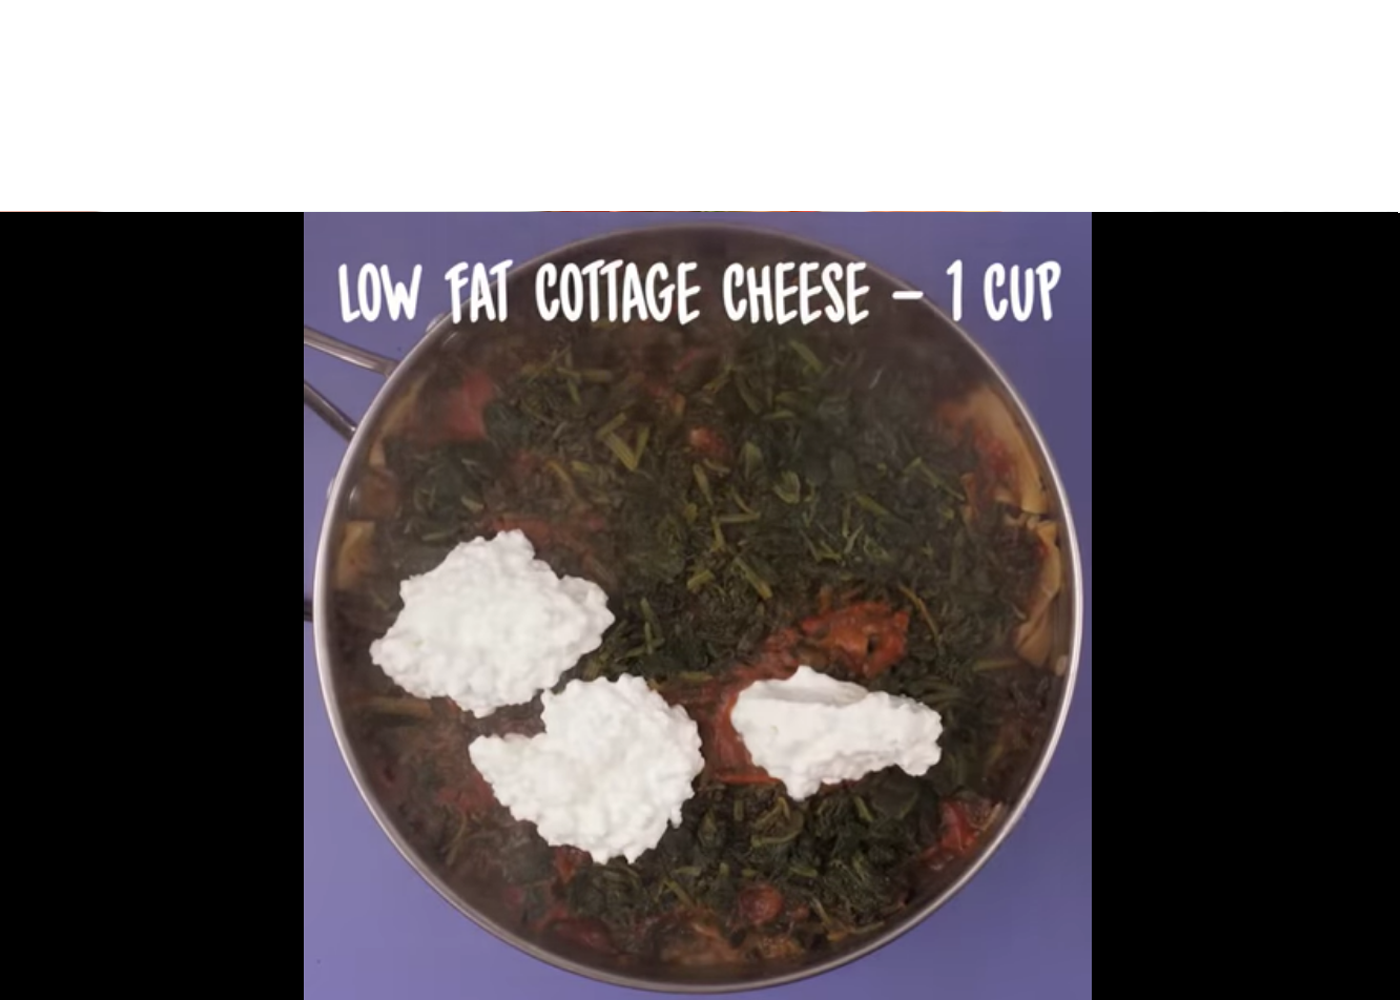 text "low fat cottage cheese - 1 cup" with an image of a recipe with cottage cheese on top